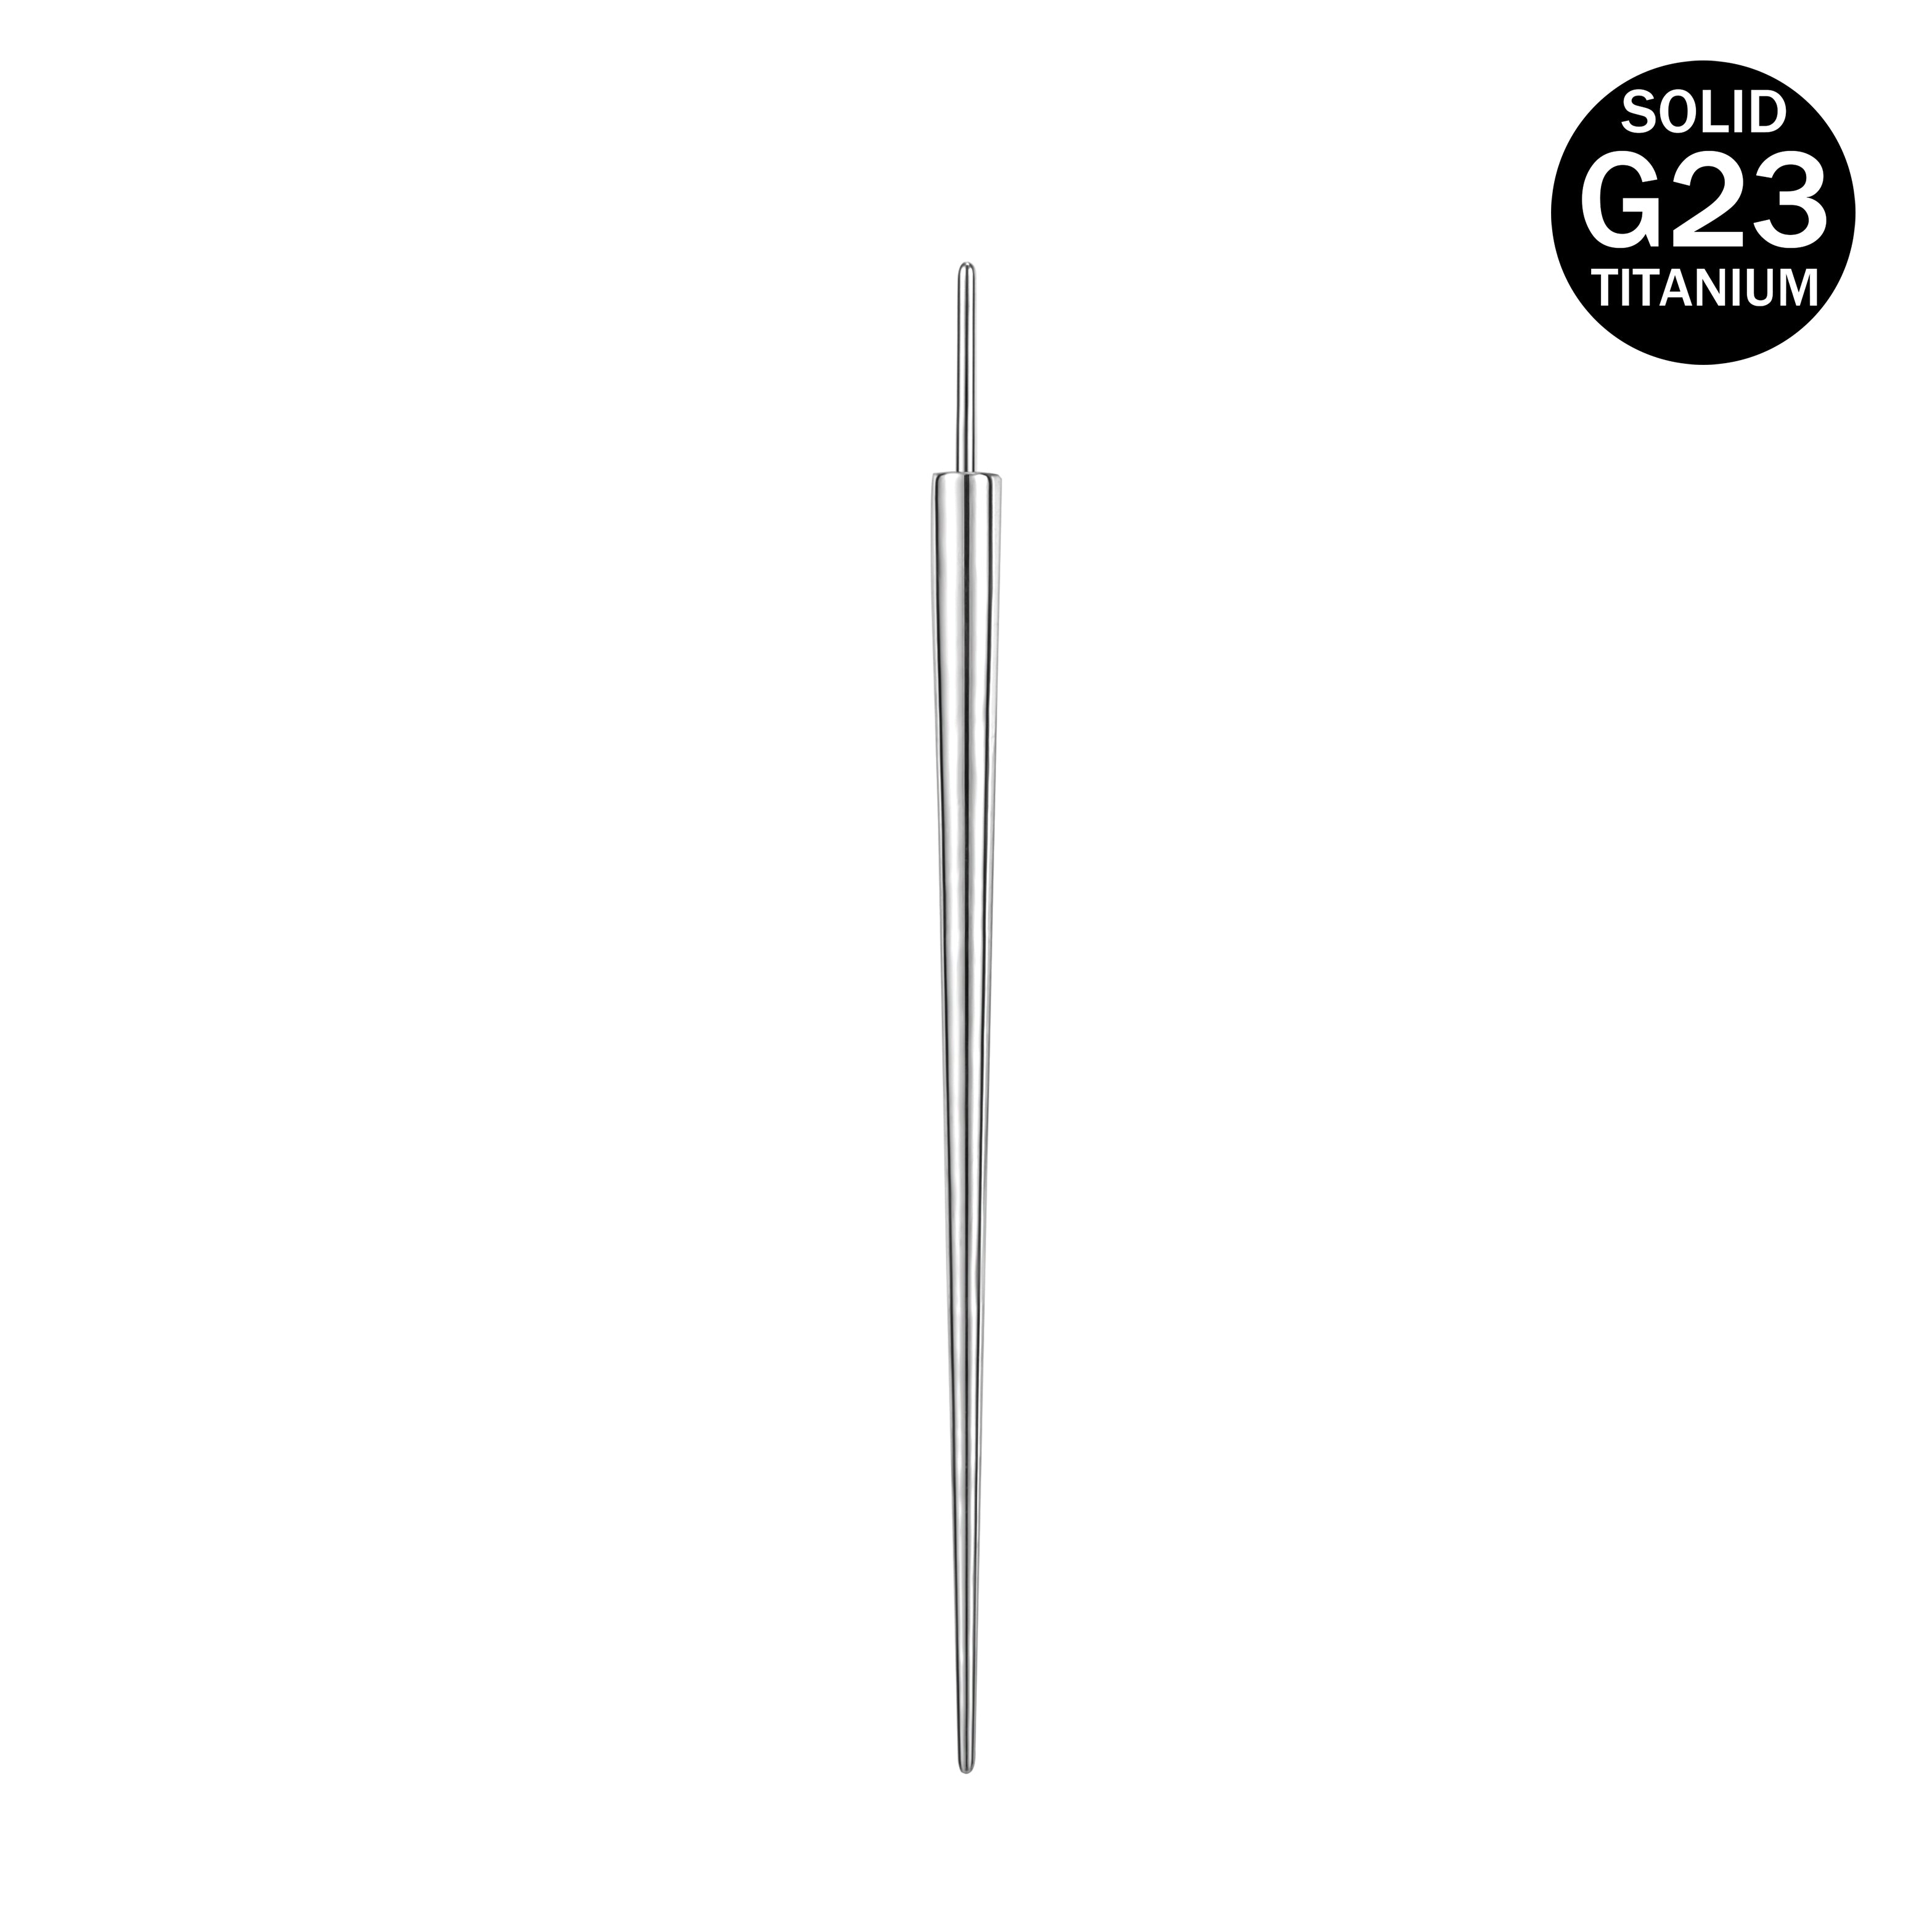 ZS G23 Titanium Insertion Pin Taper for Piercings Kit Push in Earrings Body  Piercing Assistant Tools